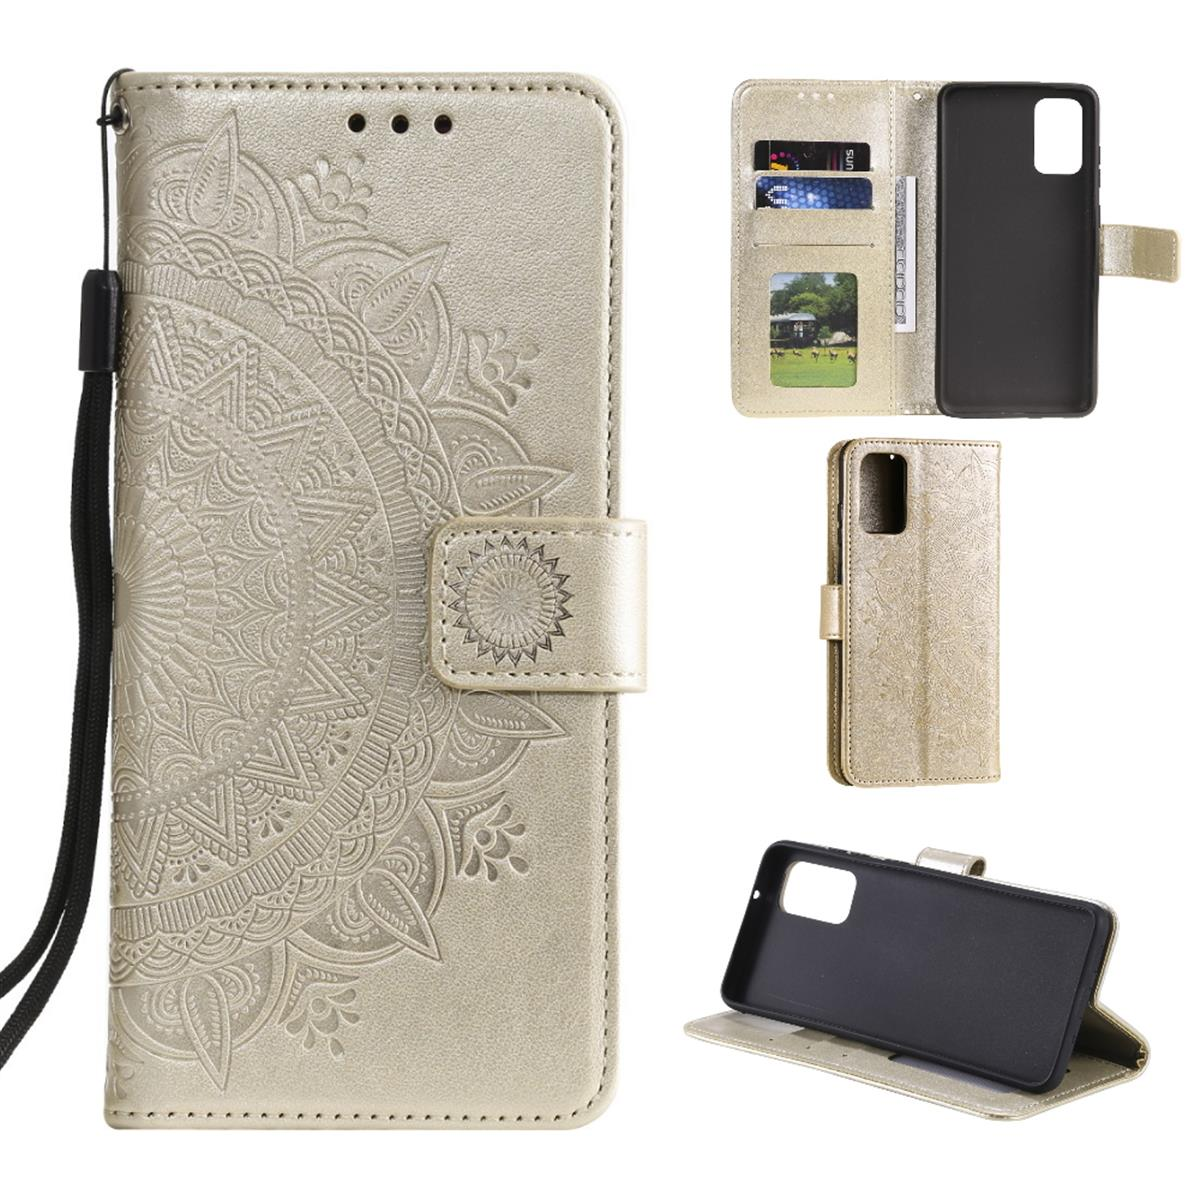 Muster, S20, Gold Klapphülle mit Samsung, Galaxy COVERKINGZ Mandala Bookcover,